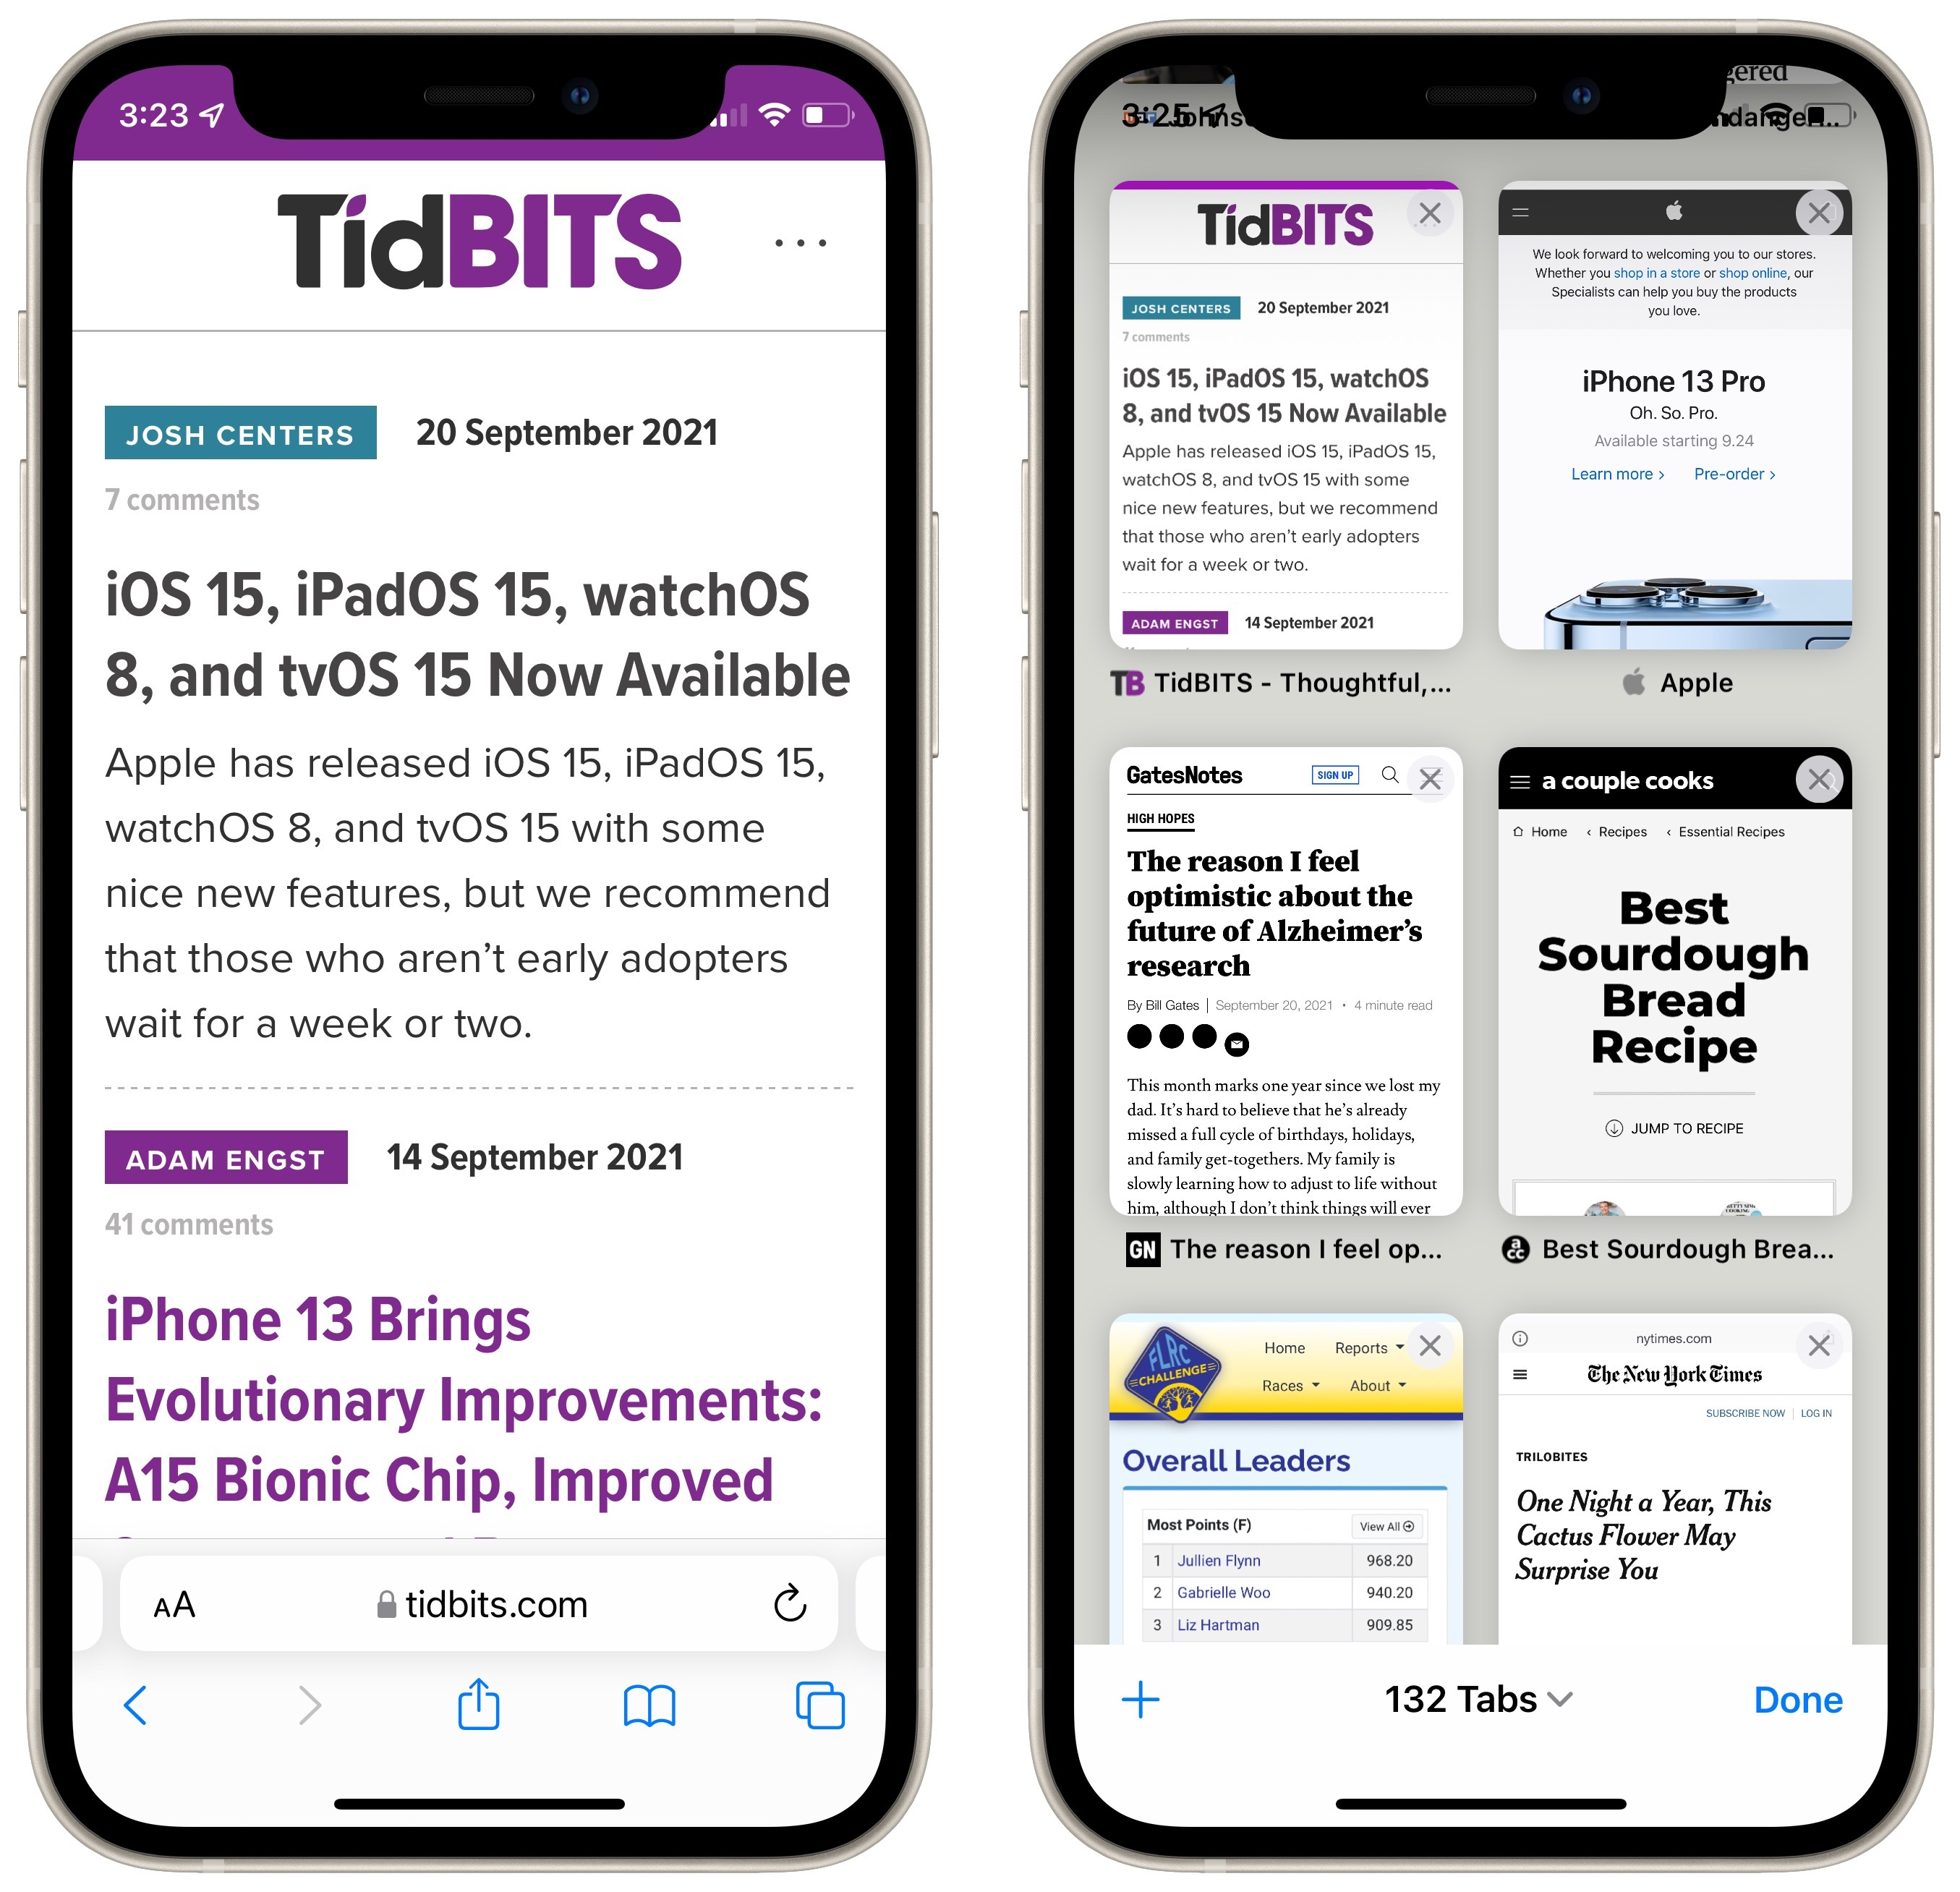 Hot New Features in Safari in iOS 15 and iPadOS 15 - TidBITS